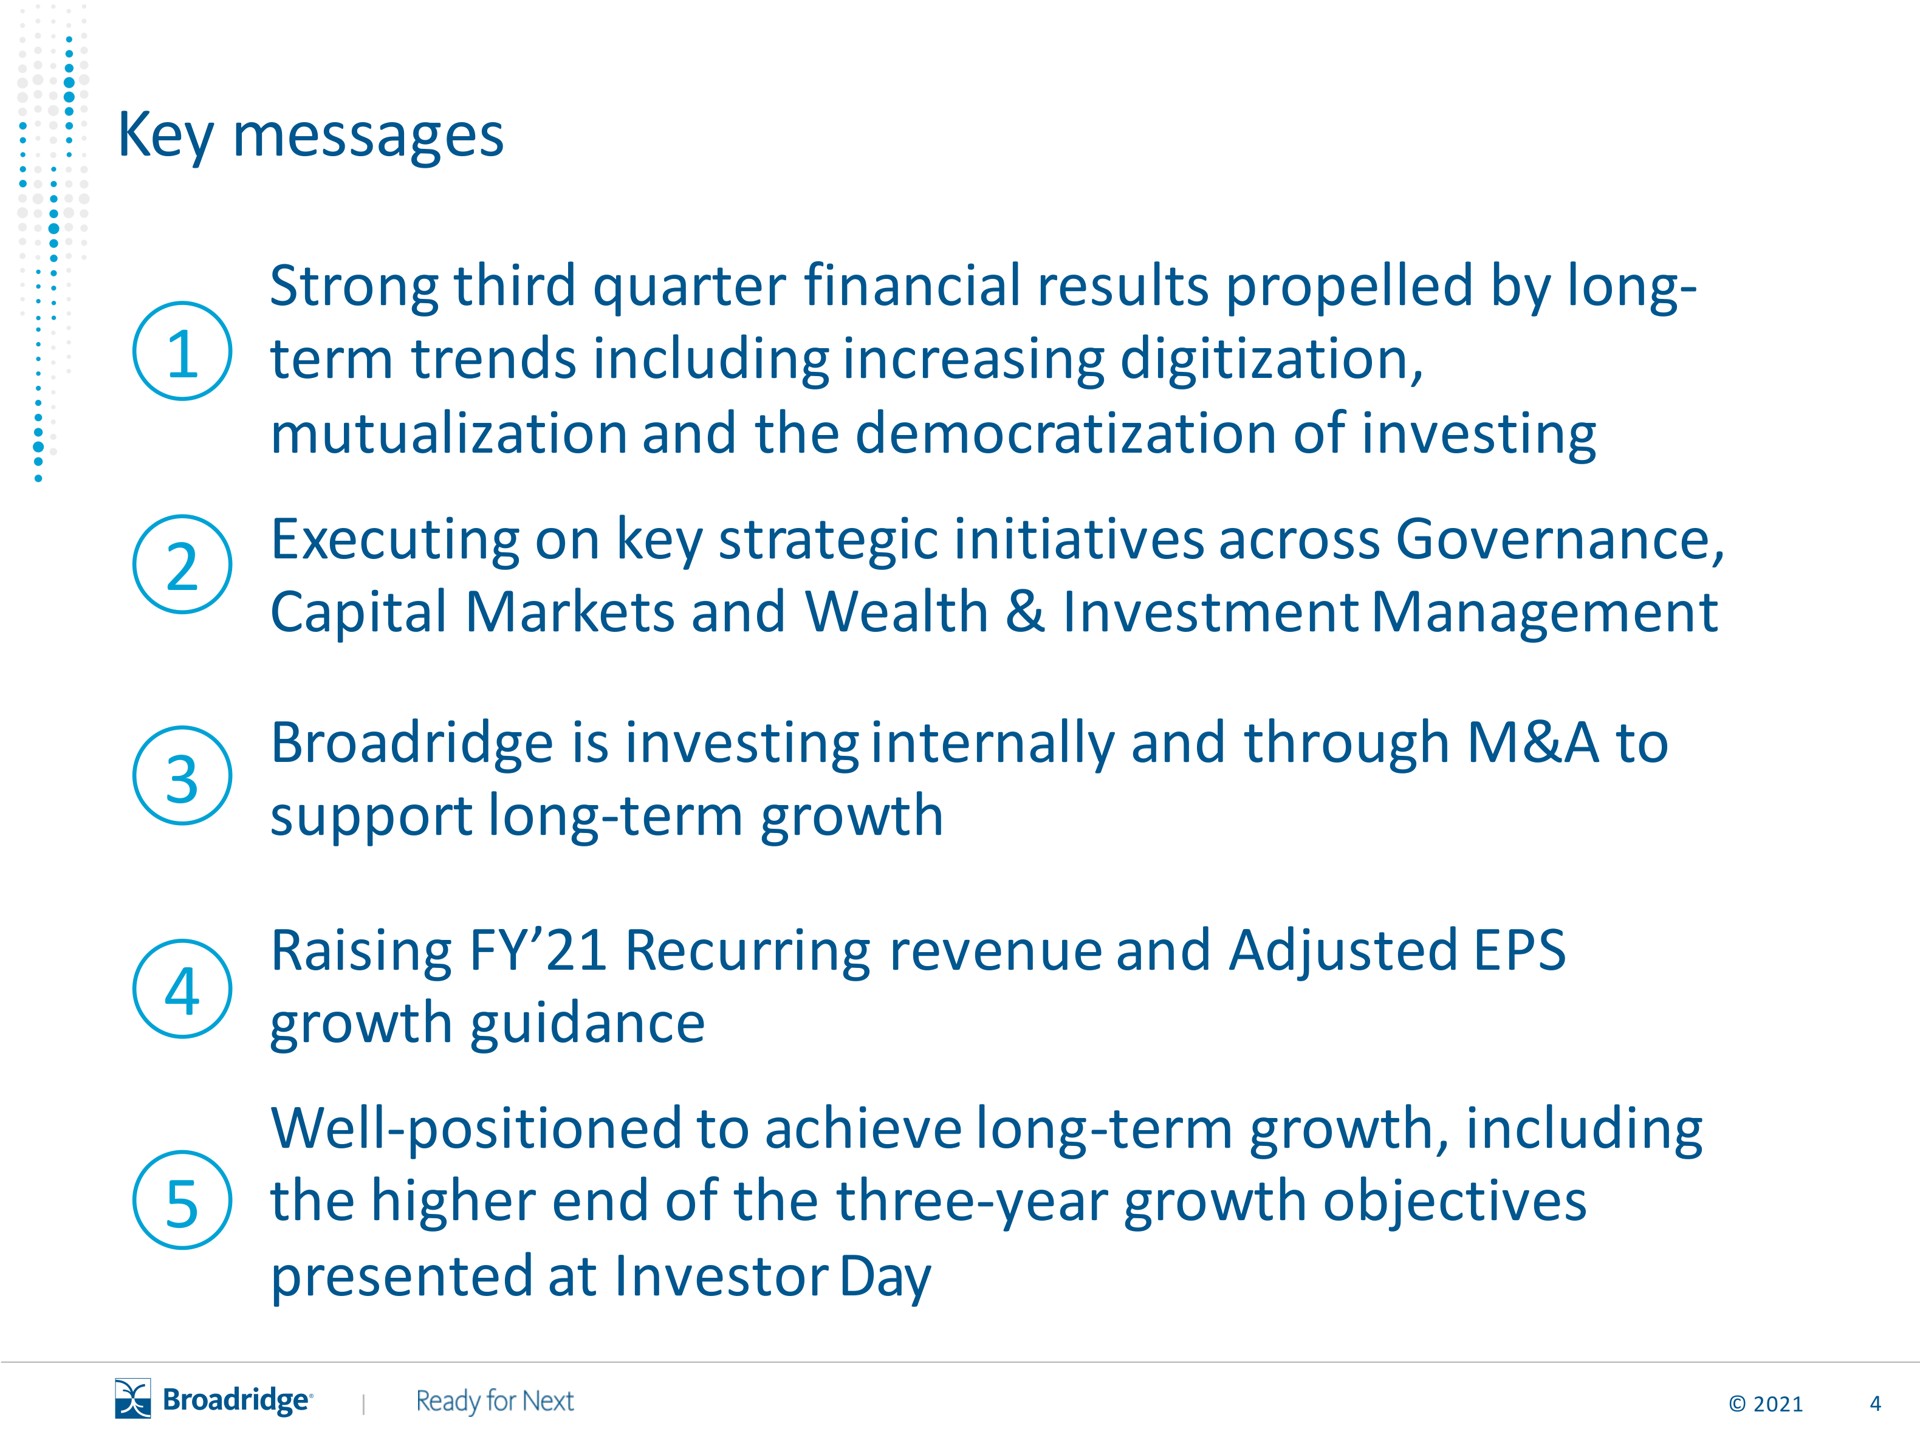 key messages strong third quarter financial results by long term trends including increasing mutualization and the democratization of investing executing on key strategic initiatives across governance capital markets and wealth investment management is investing internally and through a to support long term growth raising recurring revenue and adjusted growth guidance well positioned to achieve long term growth including the higher end of the three year growth objectives presented at investor day | Broadridge Financial Solutions